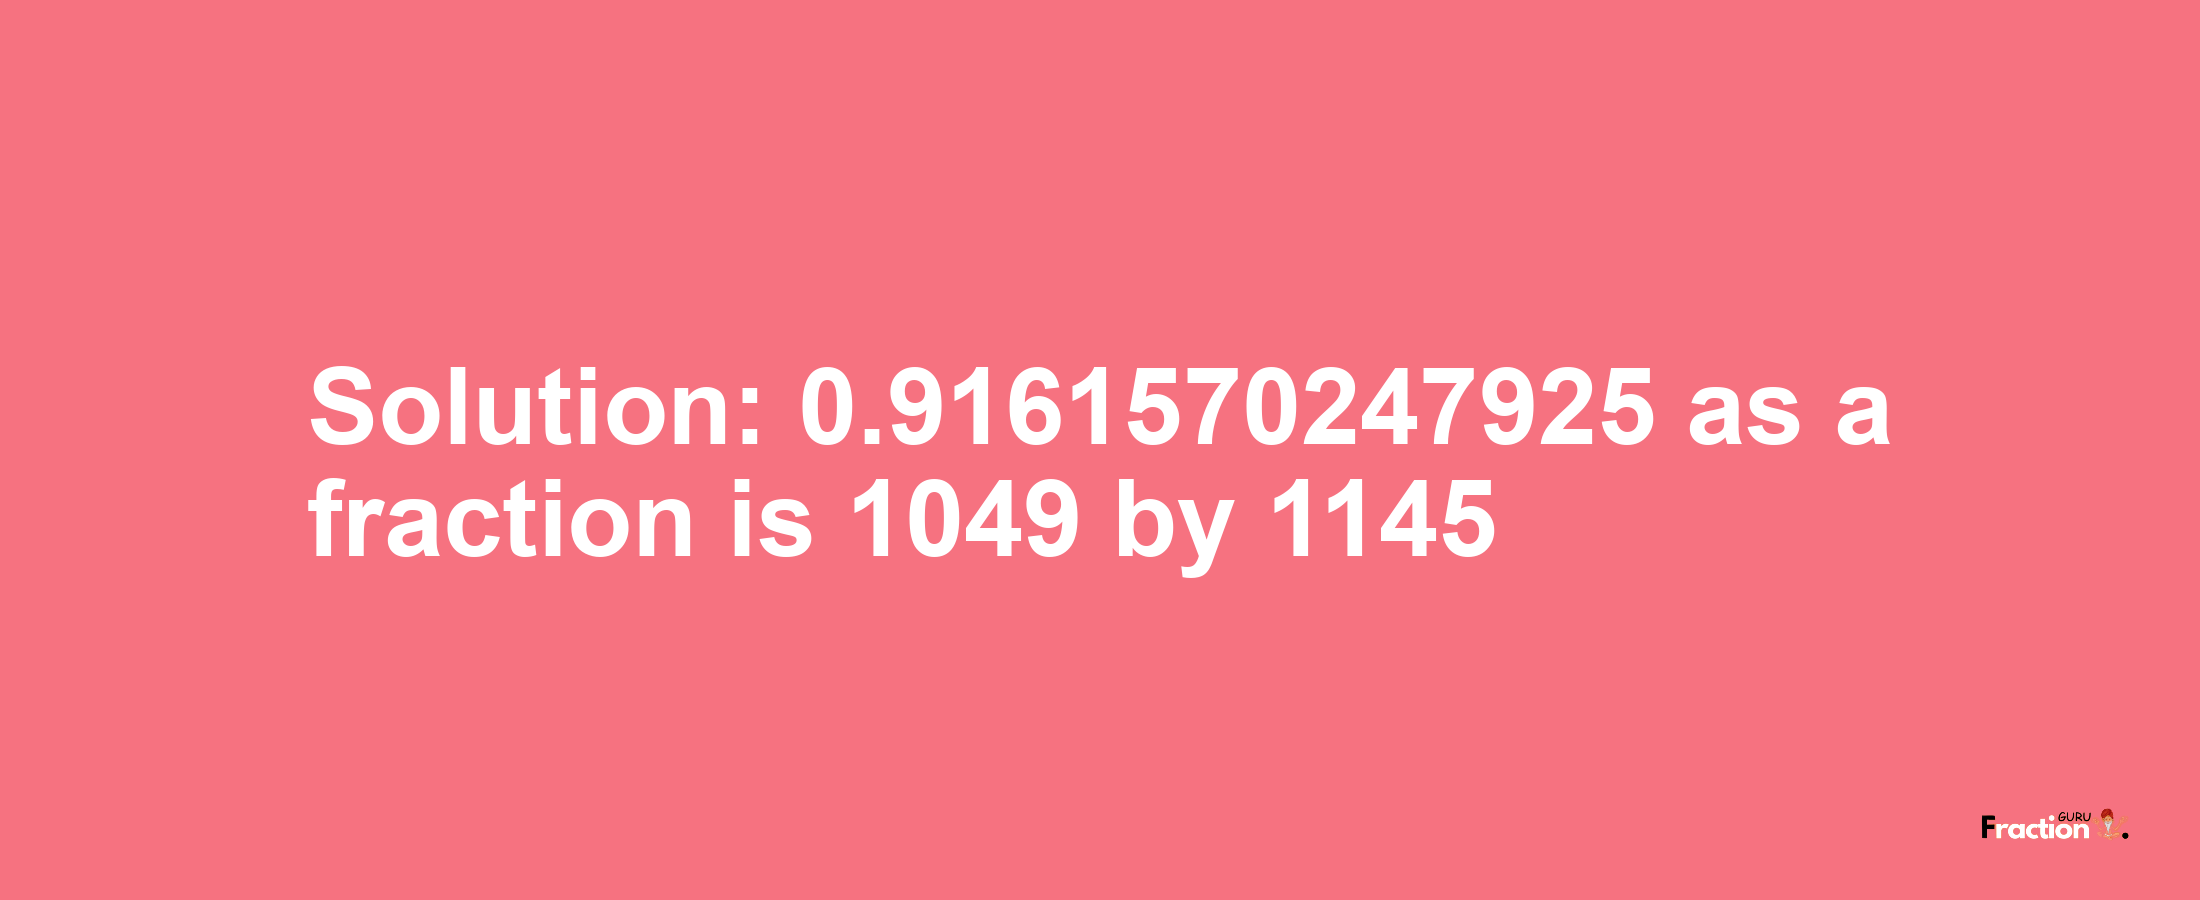 Solution:0.9161570247925 as a fraction is 1049/1145